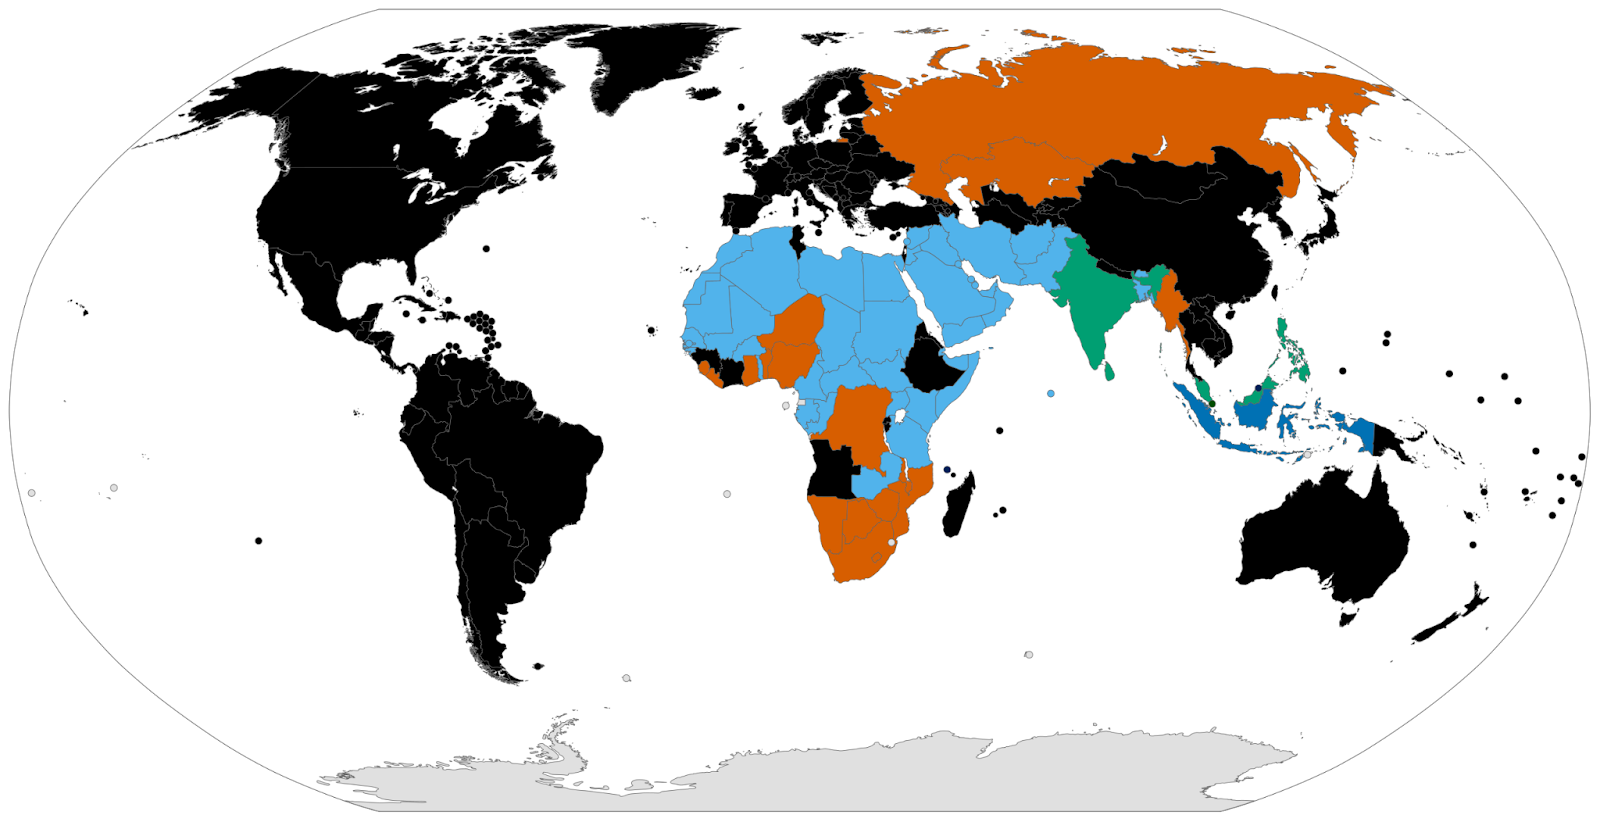 External image of a world map. The majority of the map is black, meaning that polygamy is illegal, but practice is not criminalized. The exceptions are: Most of northern Africa and parts of south-western Asia being light blue, meaning polygamy is only legal for muslims. Many of the southern-eastern Asian islands are darker blue, meaning polygamy is legal. Parts of southern and northern Africa and northern Asia being orange, meaning polygamy is legal in some regions. Some south-eastern Asian islands and India being green, meaning status is unknown. Antarctica is white, meaning polygamy is illegal and practice is criminalized.